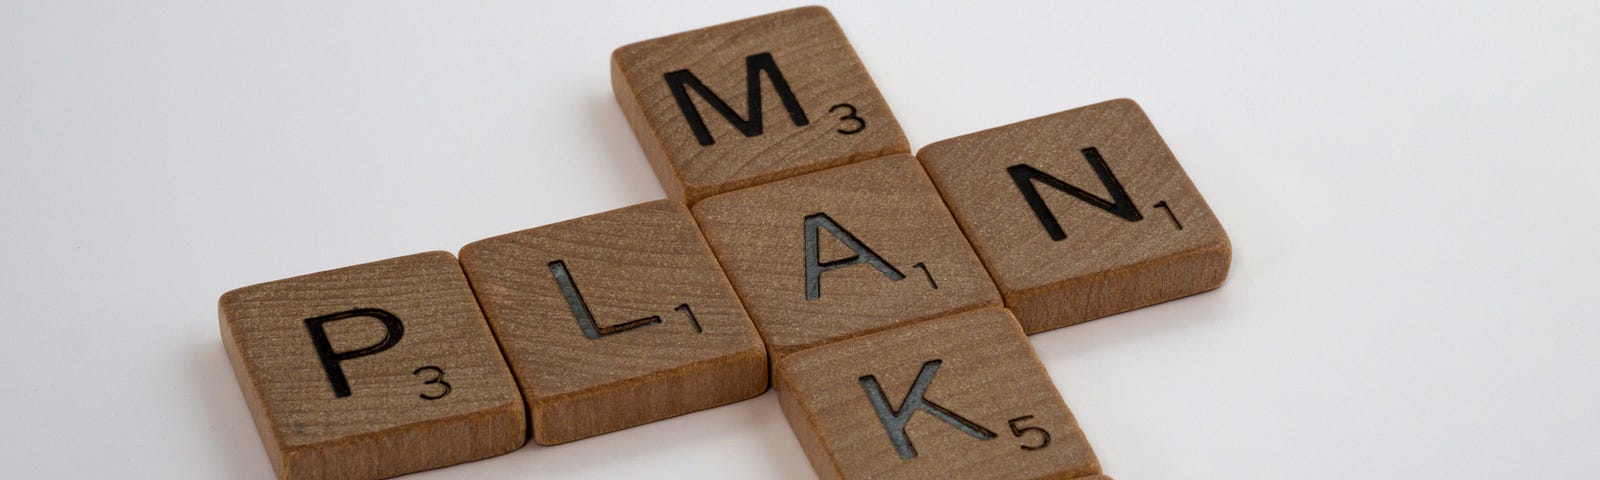 Scrabble pieces spelling out “make” and “plan”.